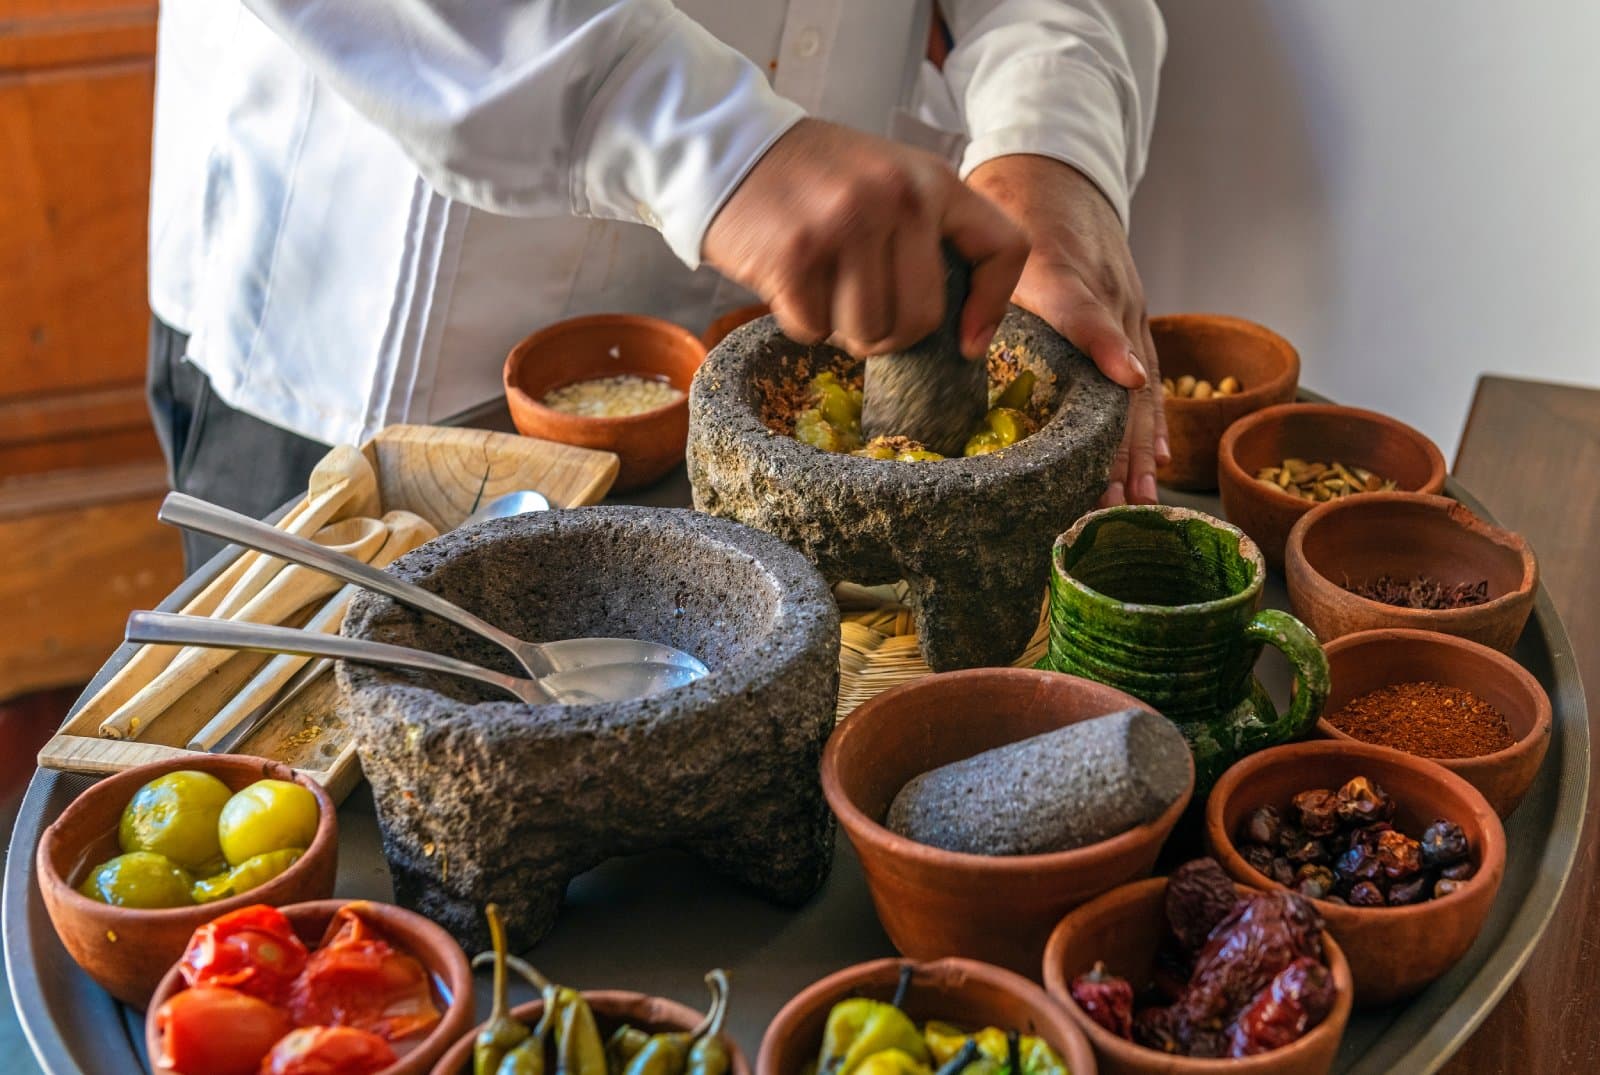 <p class="wp-caption-text">Image Credit: Shutterstock / SL-Photography</p>  <p><span>Oaxaca is a culinary paradise within Mexico, celebrated for its complex flavors, indigenous ingredients, and traditional cooking methods. The region’s gastronomy expresses its cultural diversity, featuring mole, tlayudas, and mezcal dishes. Oaxaca’s markets are vibrant hubs of activity where visitors can explore a wide array of local ingredients, including chocolate, cheese, and chapulines (grasshoppers).</span></p>